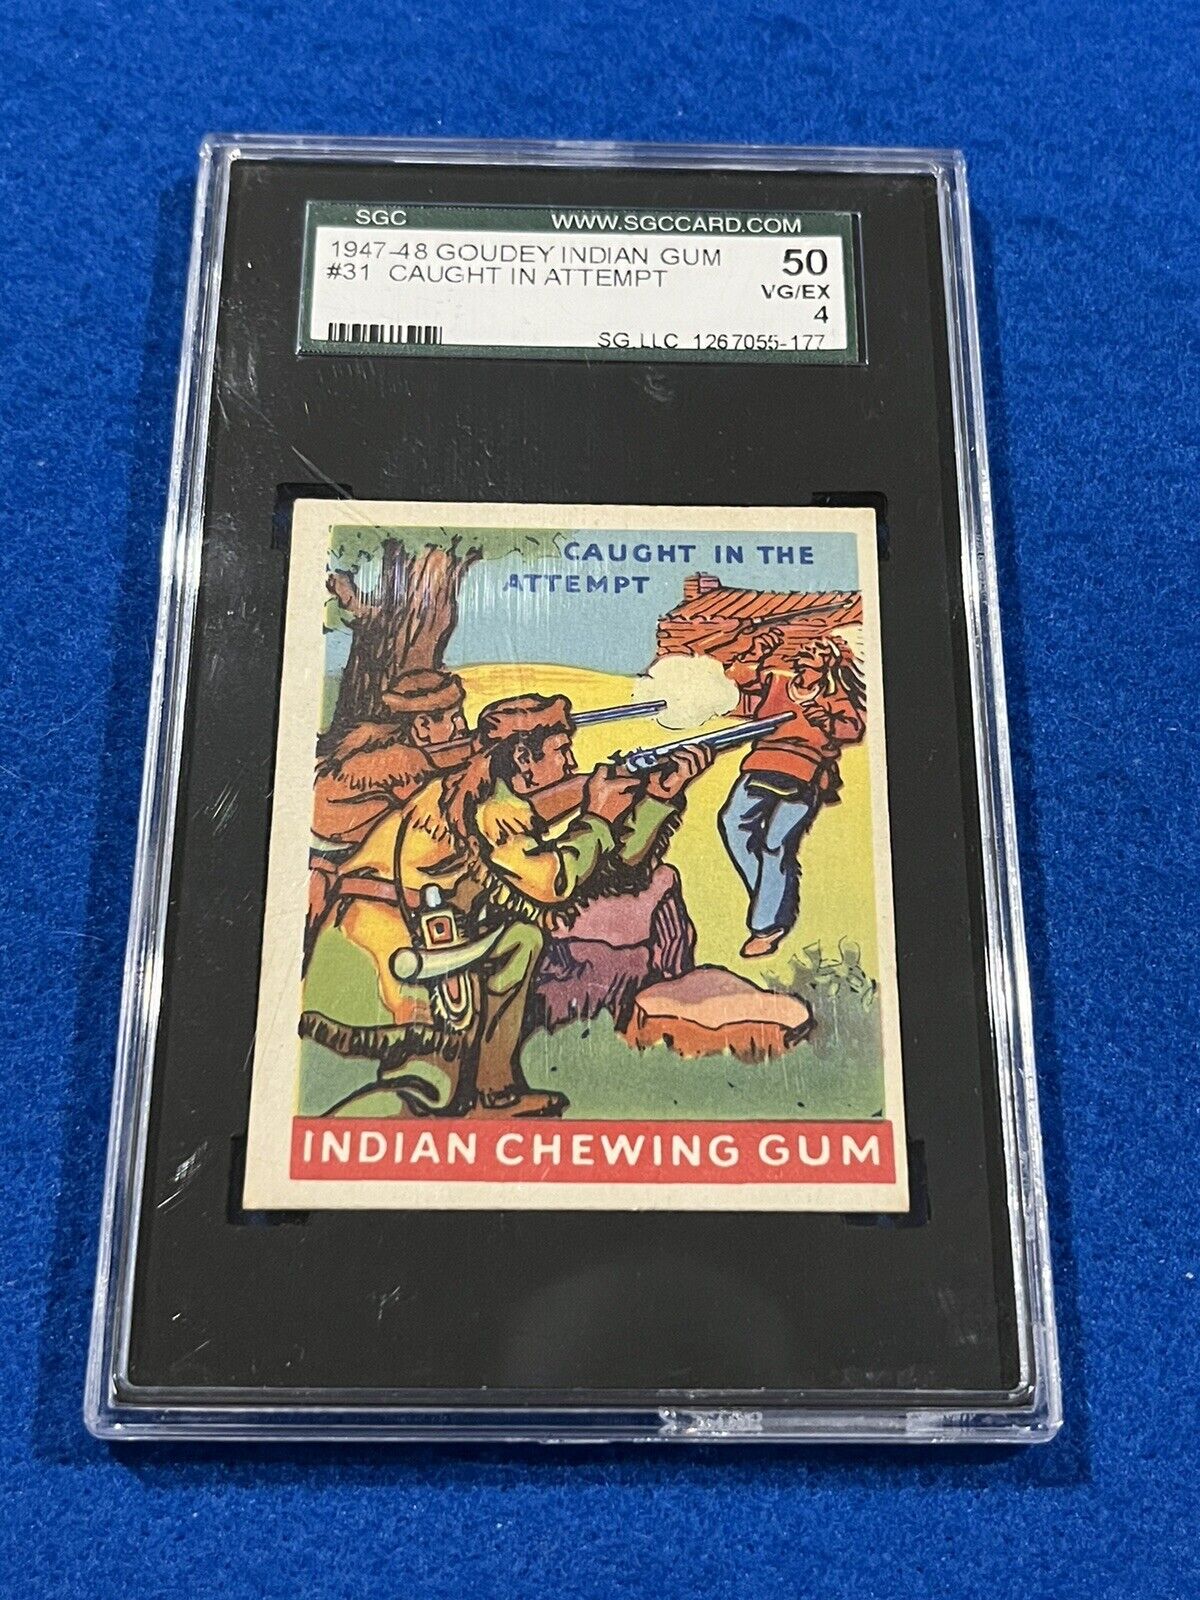 1947-48 Goudey Indian Gum Non Sports Graded Card SGC 4 #31